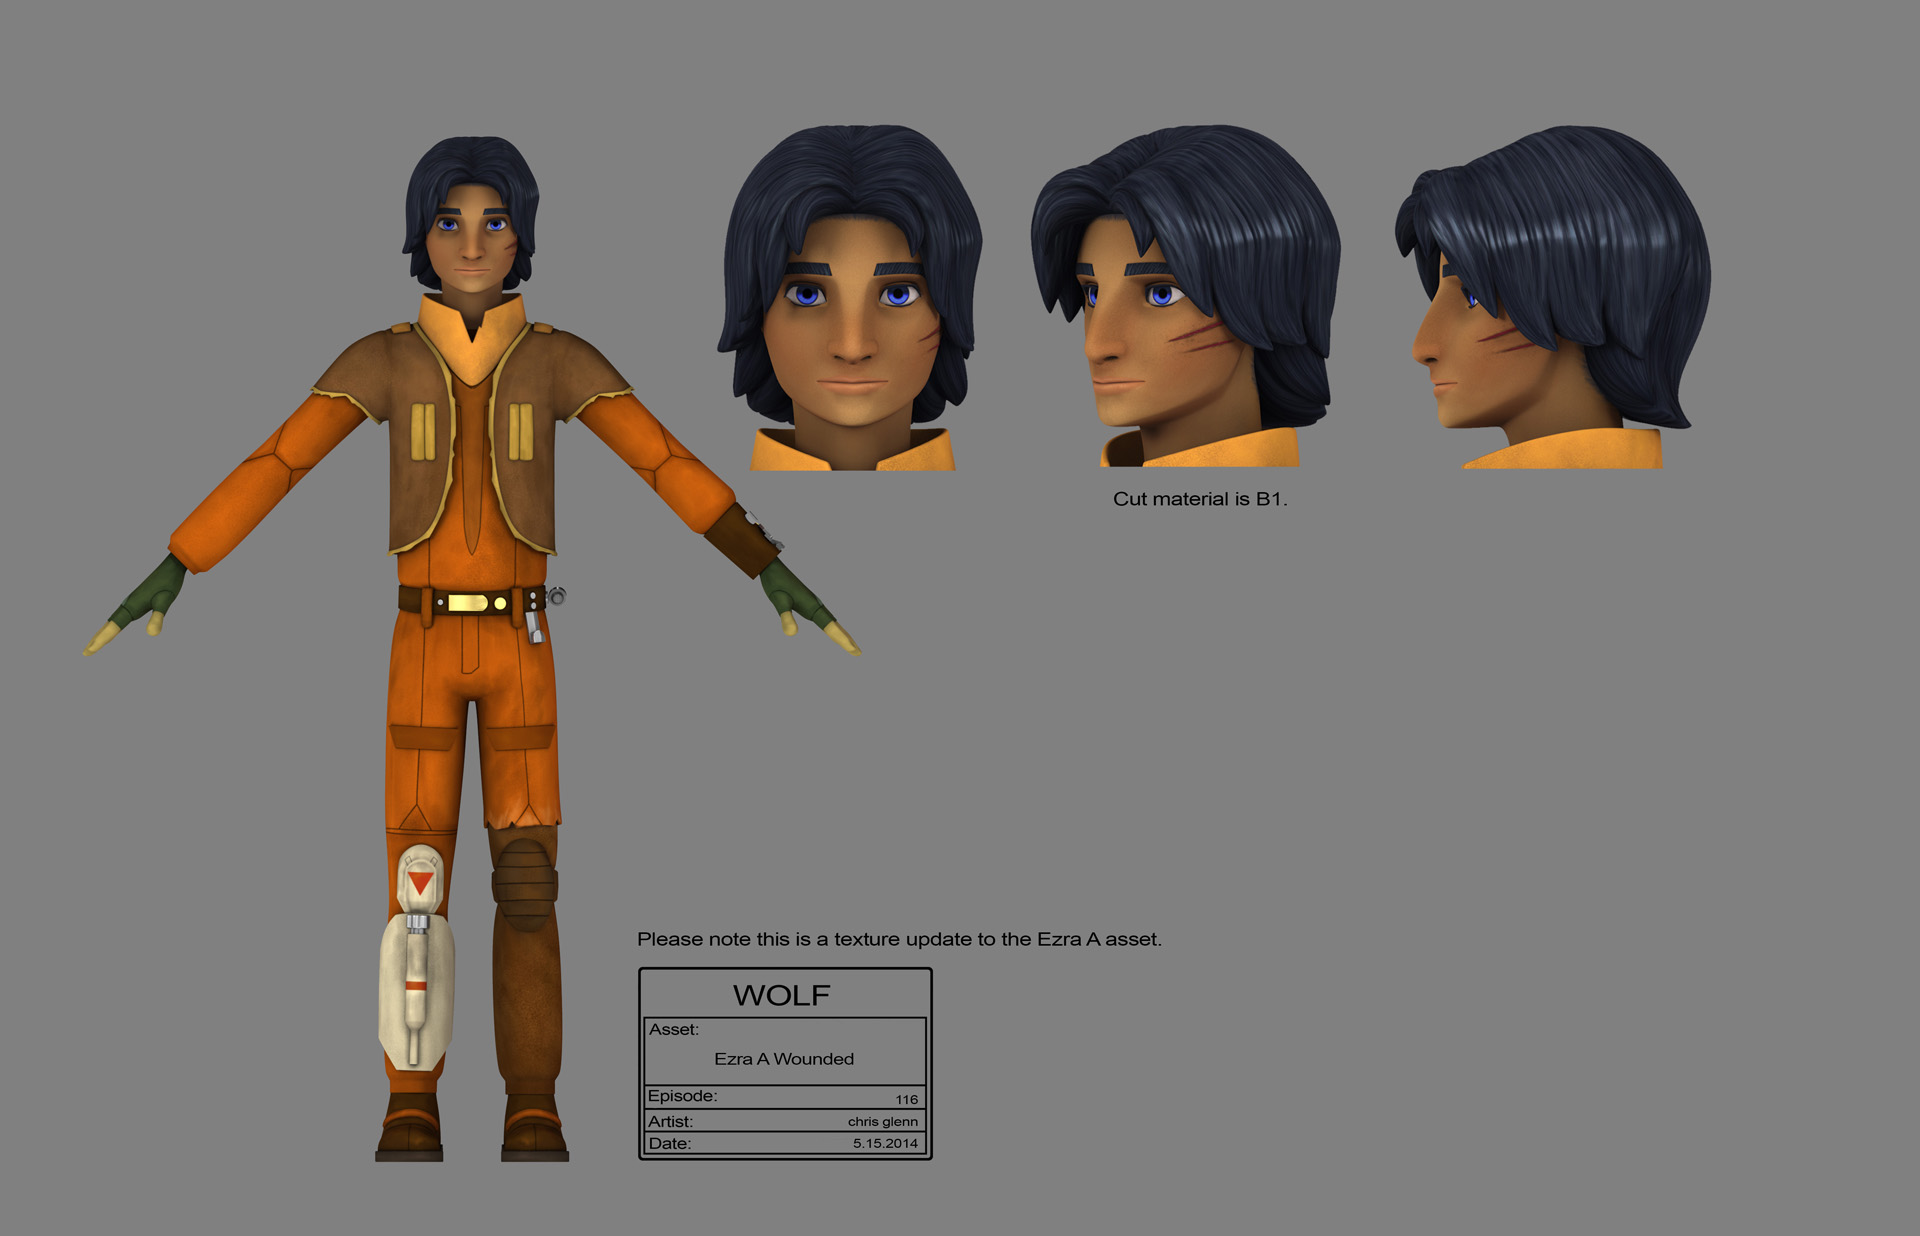 http://vignette3.wikia.nocookie.net/starwarsrebels/images/f/f1/Fire_Across_the_Galaxy_Concept_Art_11.jpg/revision/latest?cb=20150303060318